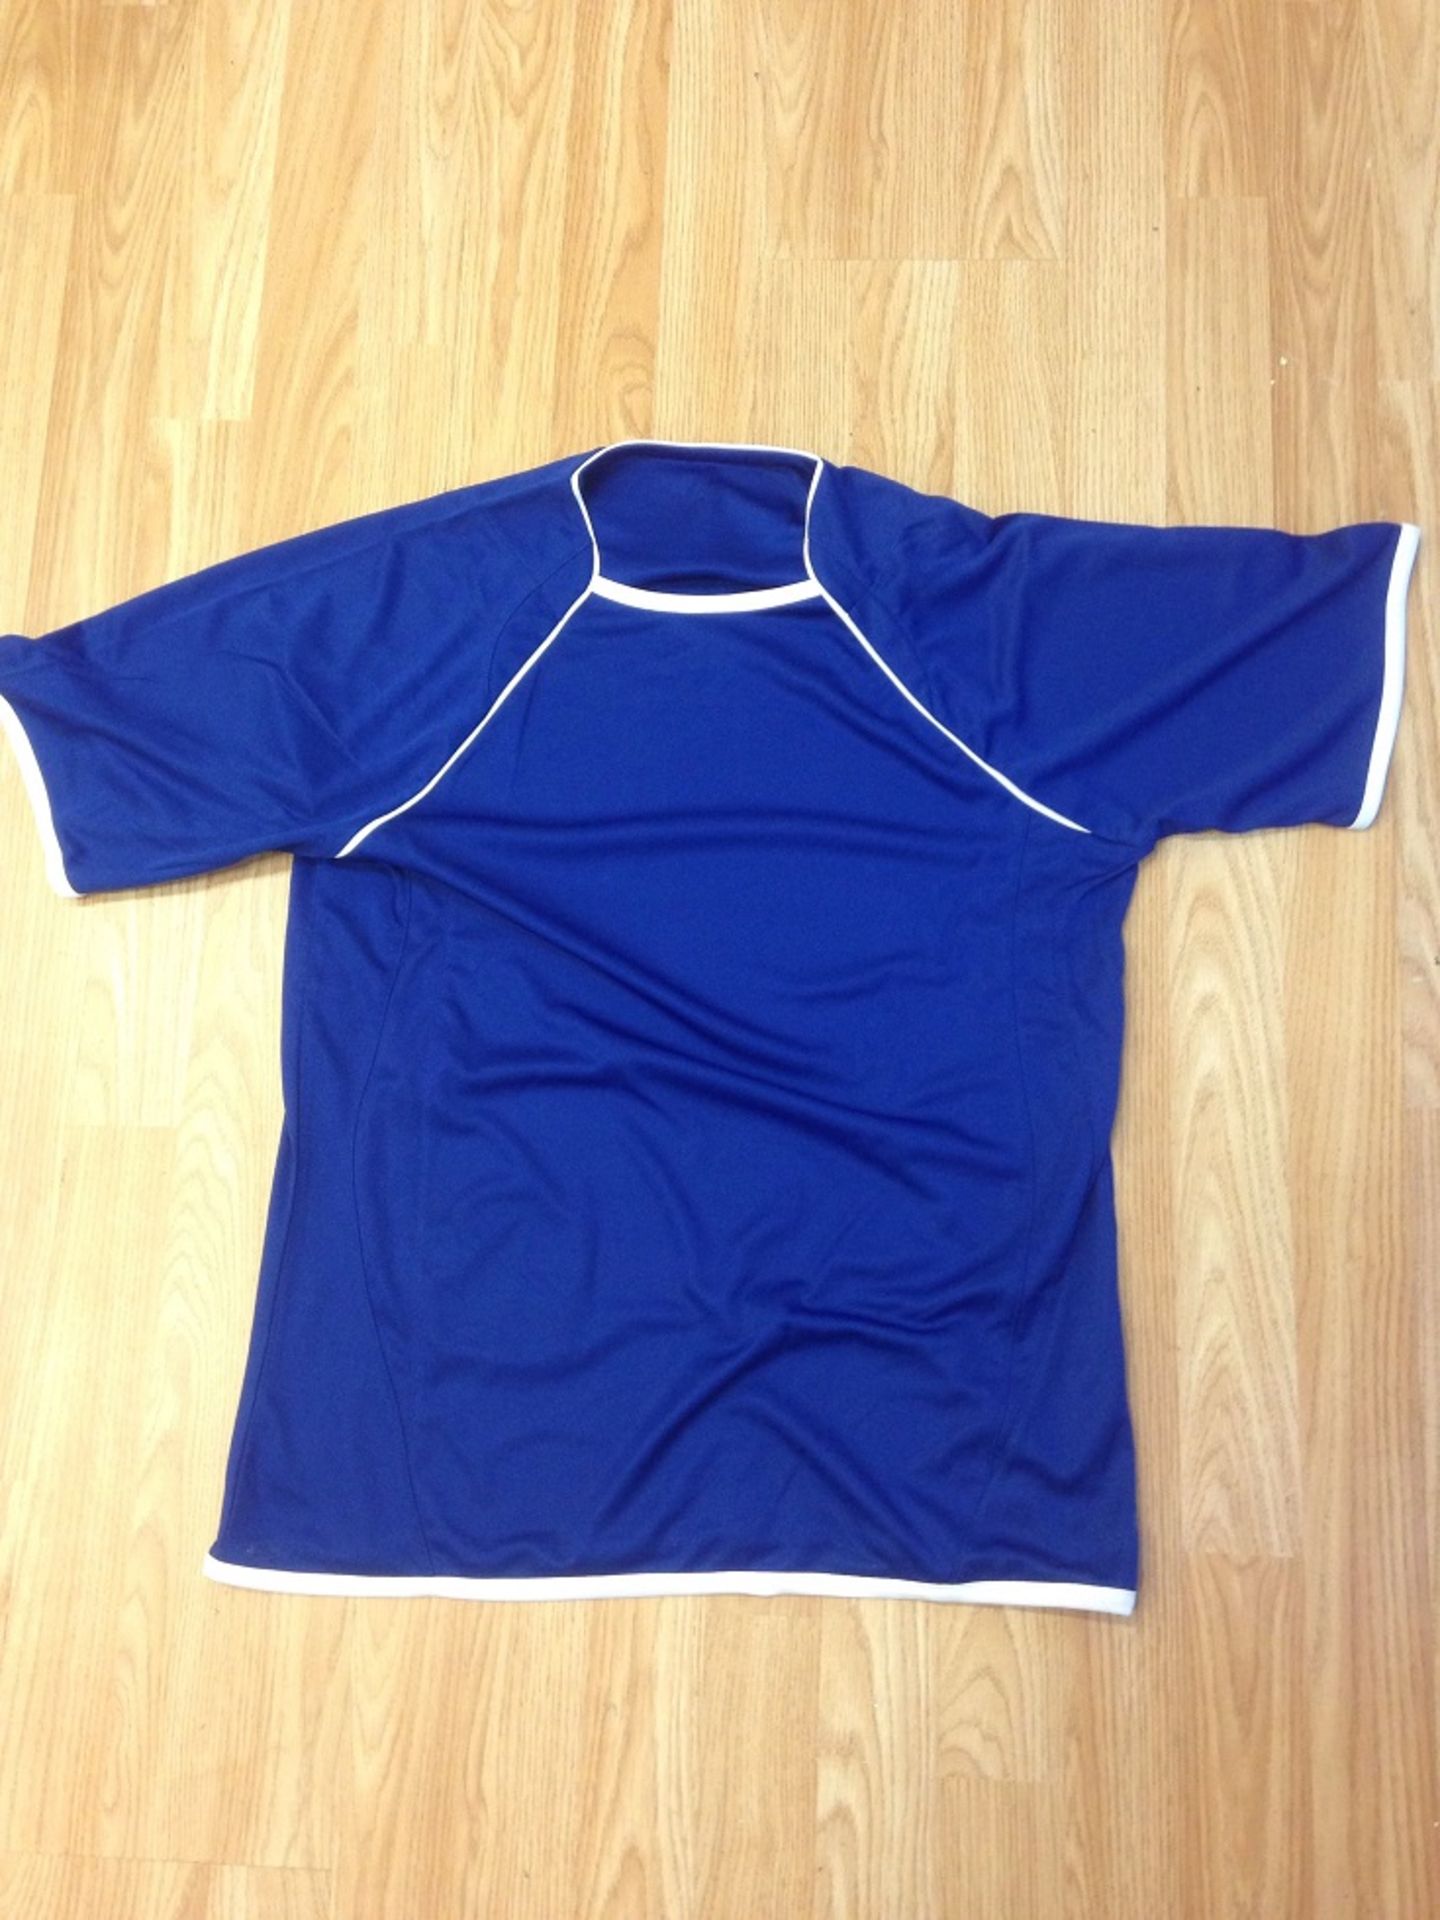 1 MIXED LOT OF 3XL AND XS ROYAL PLAIN FOOTBALL TOPS APPROX 12 PIECES